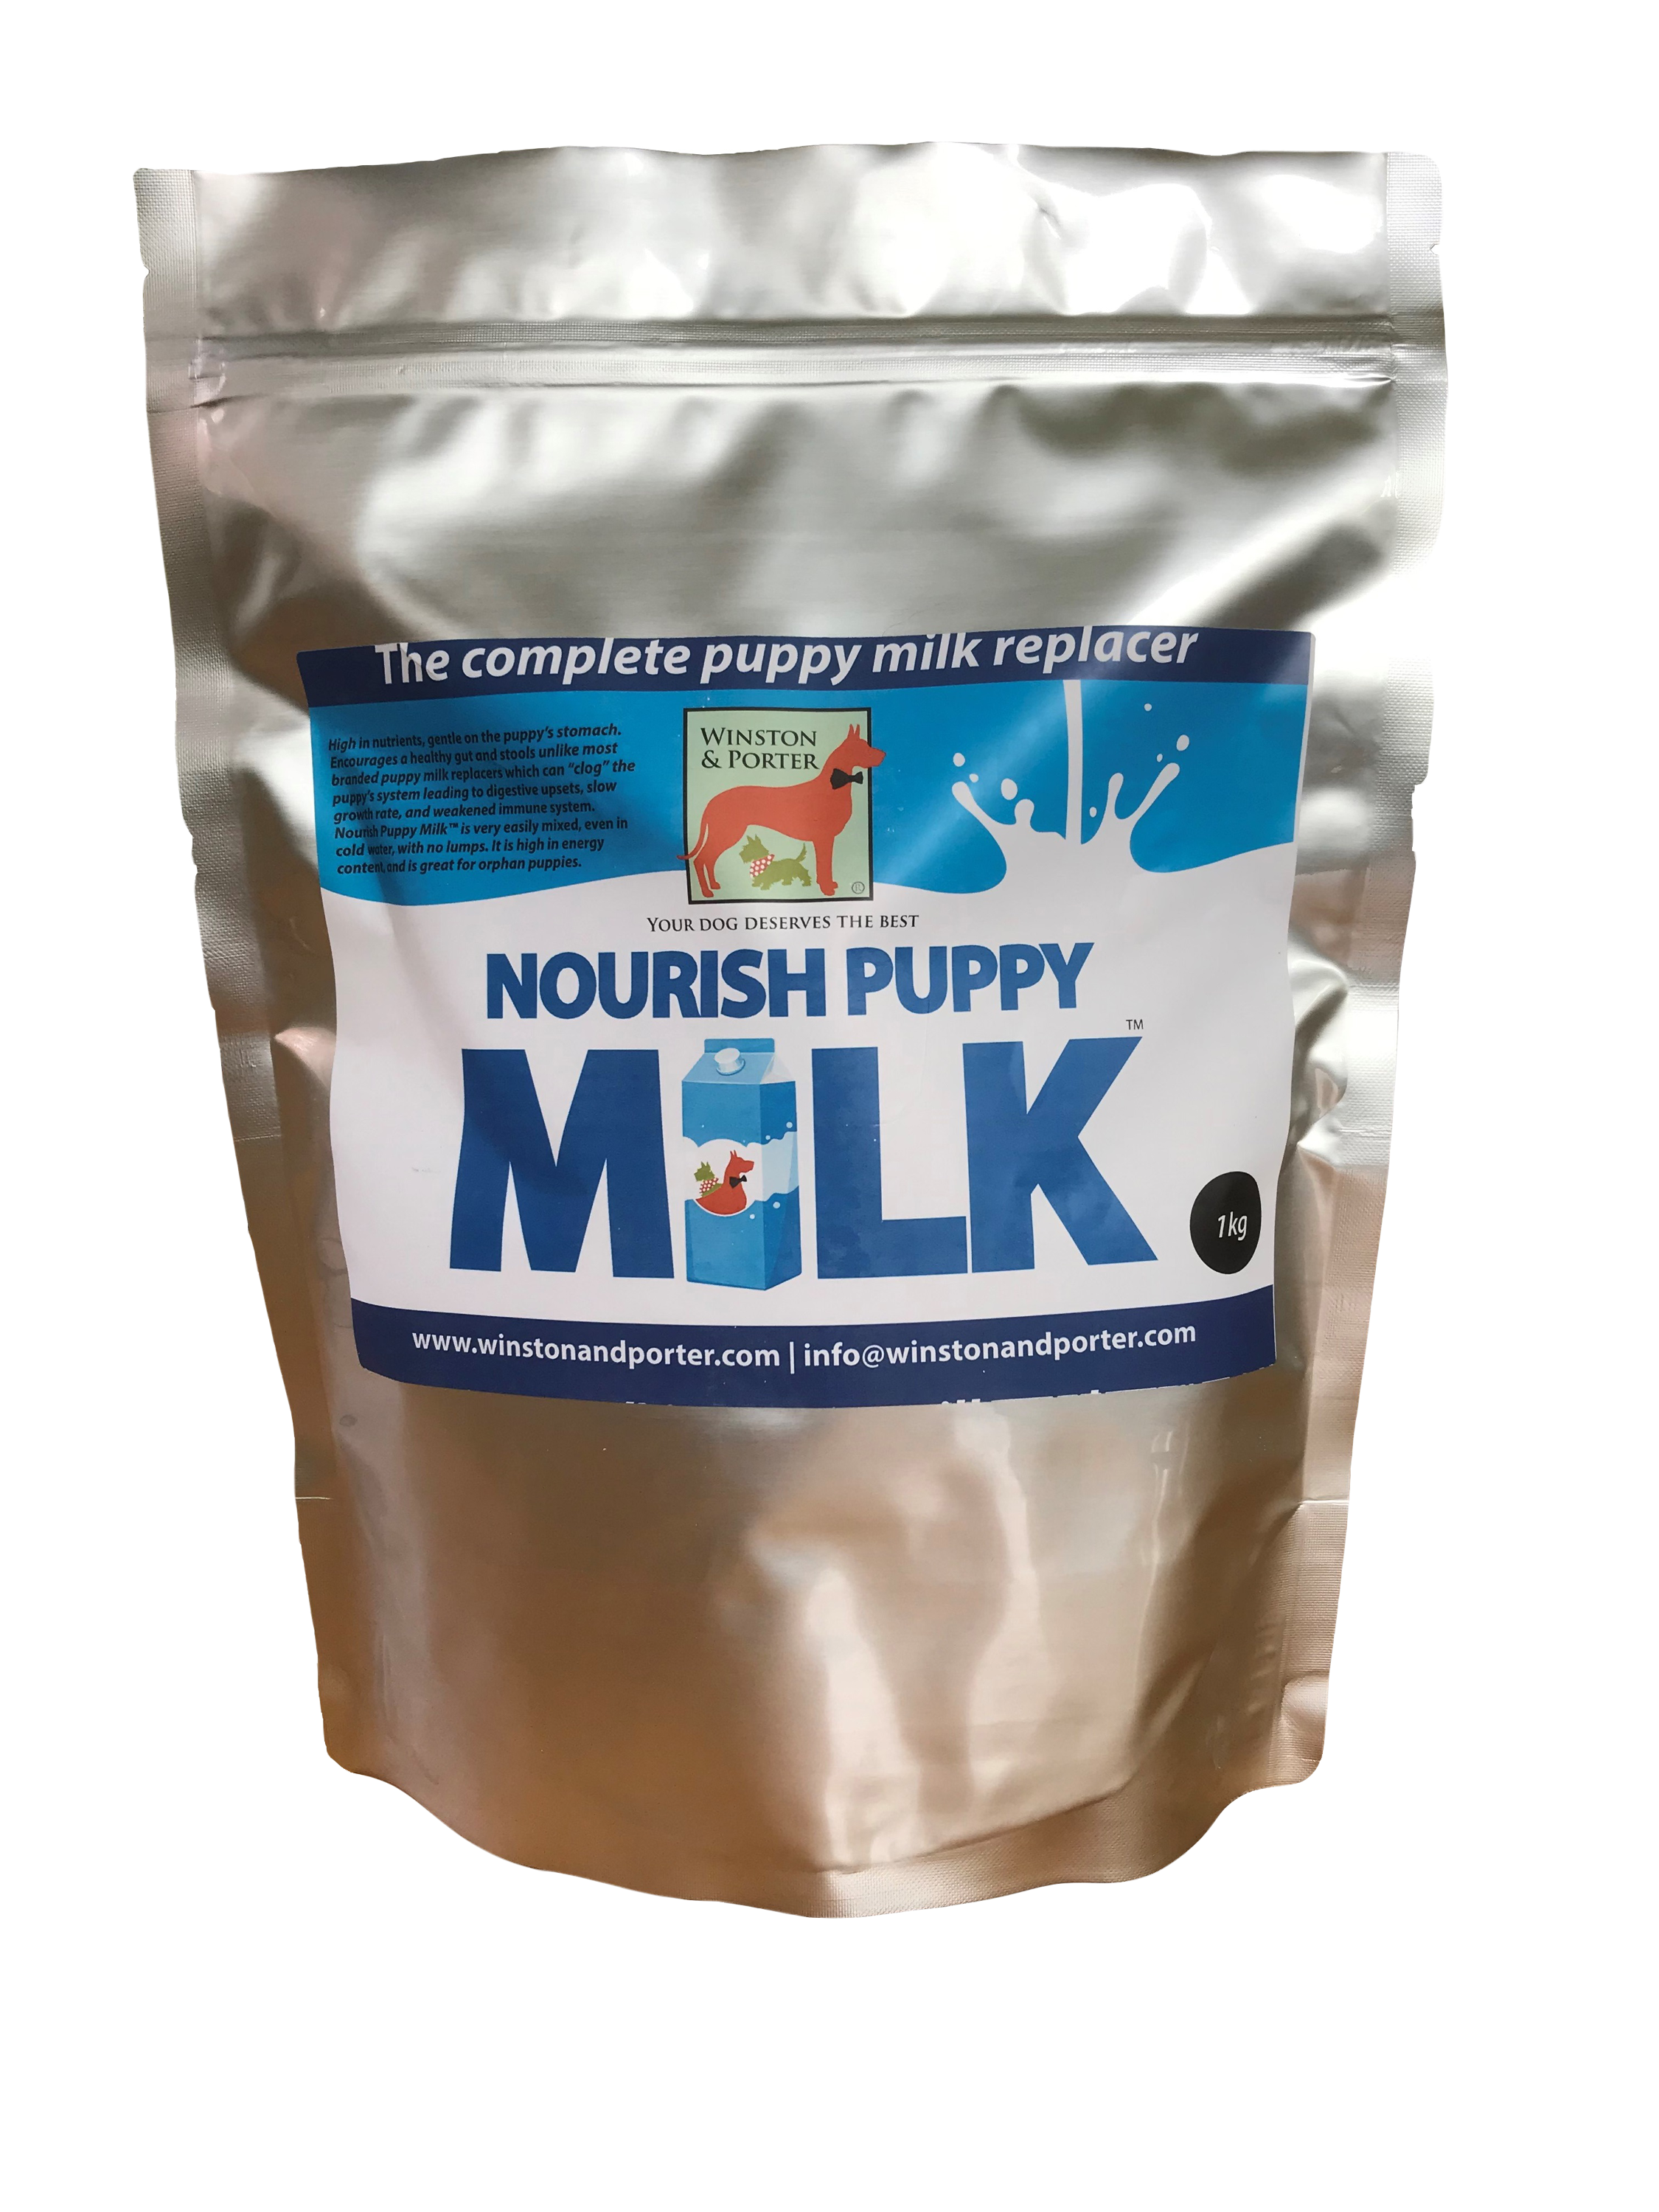 The Complete Puppy Milk Replacer Powder From